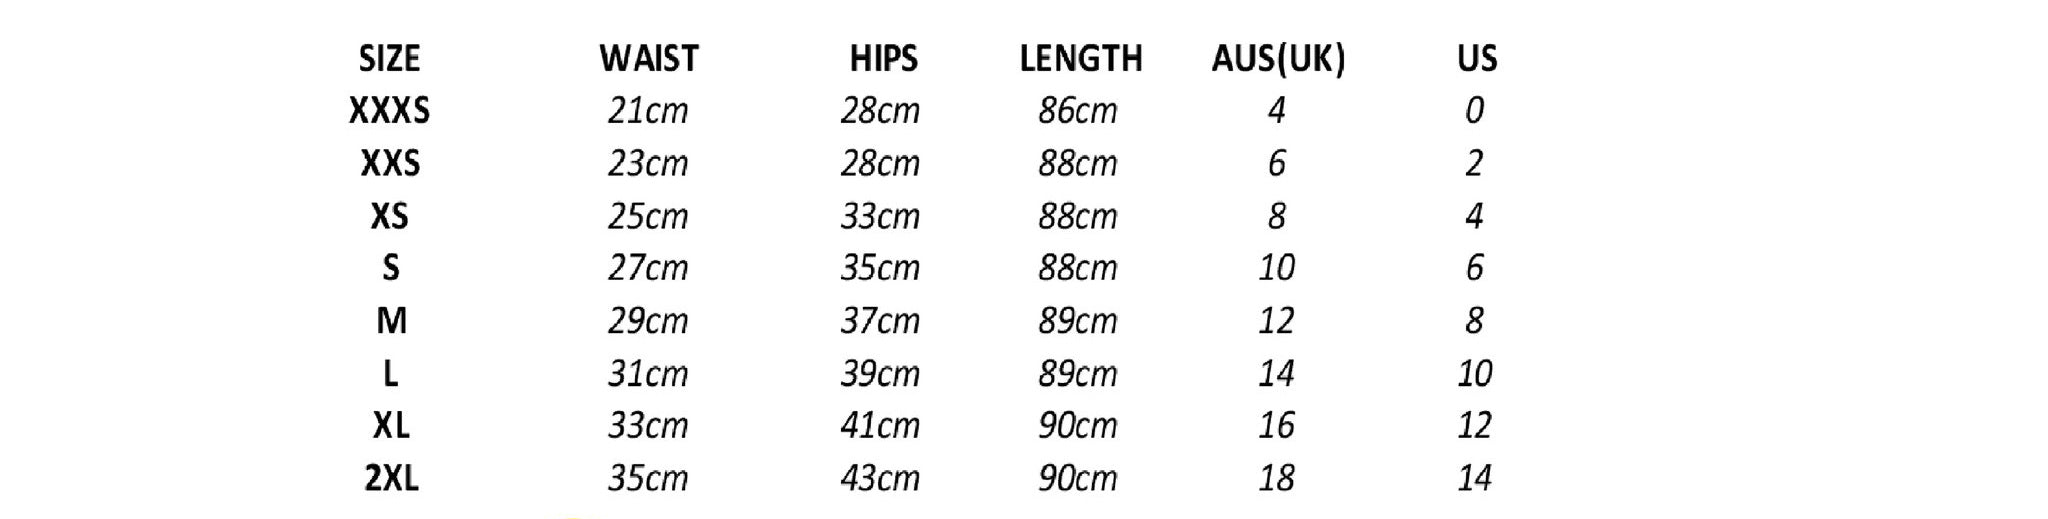 Tights Sizing Guide